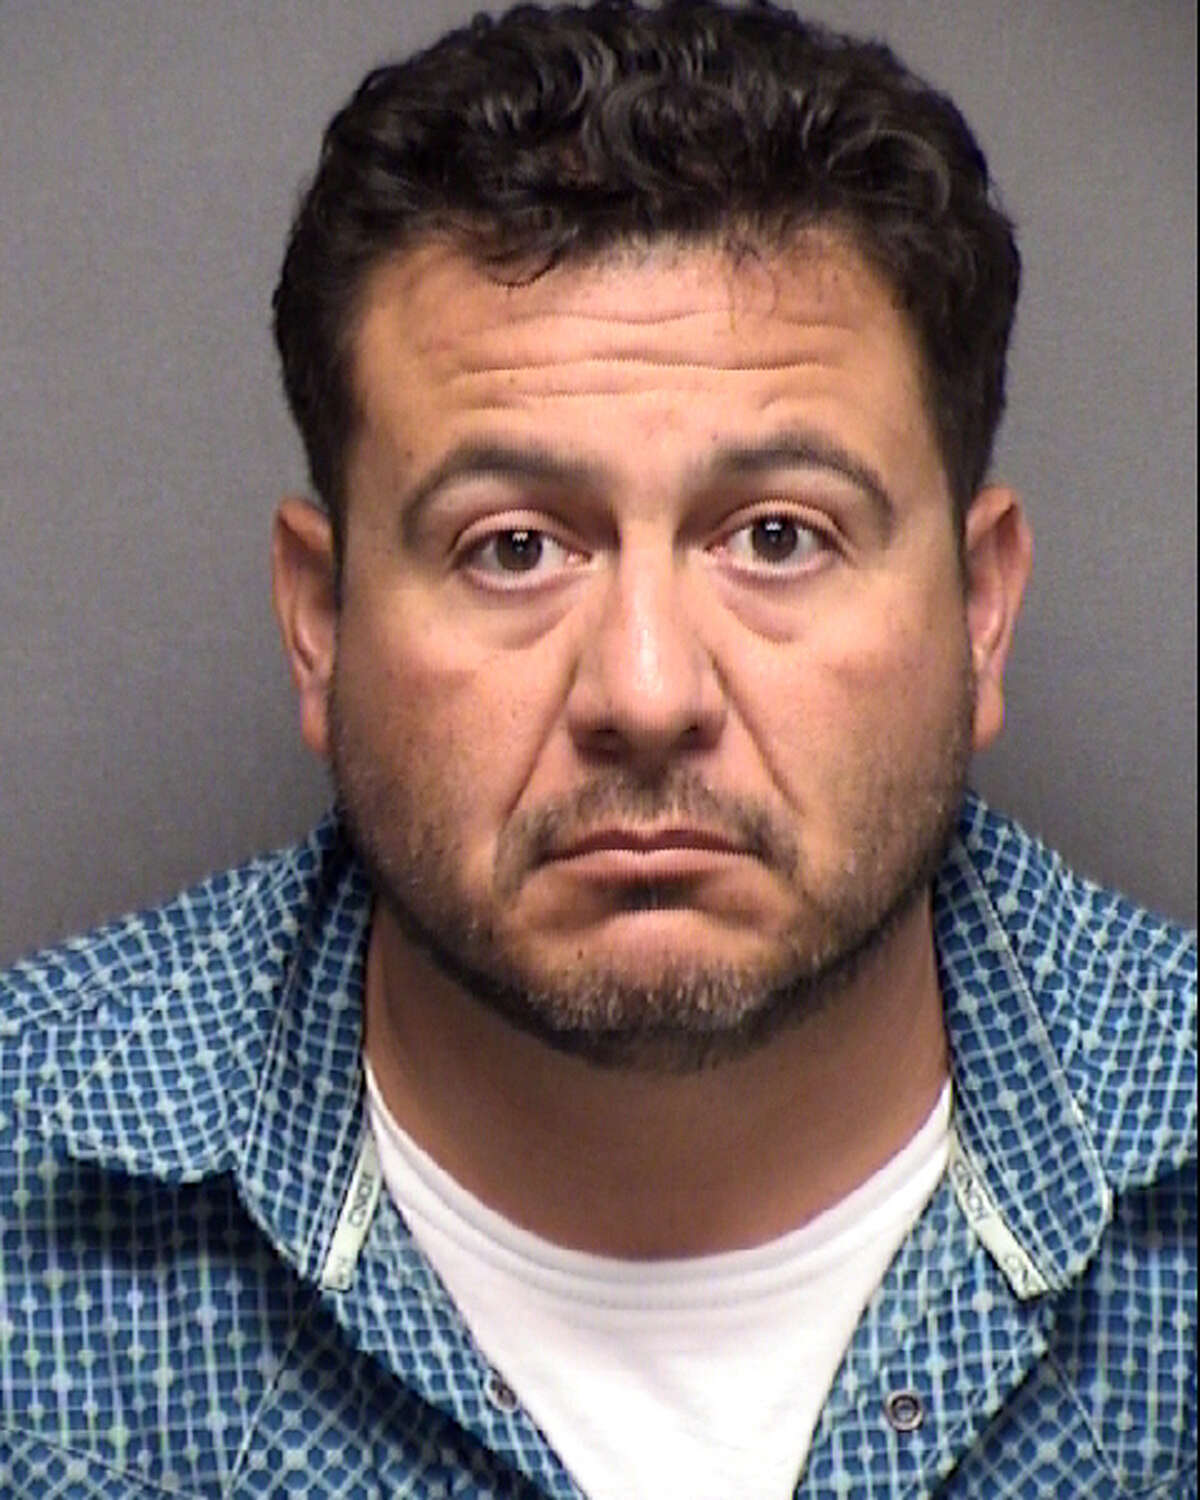 Ubaldo Cervantes was charged with driving while intoxicated with a child on September 22, 2019.  